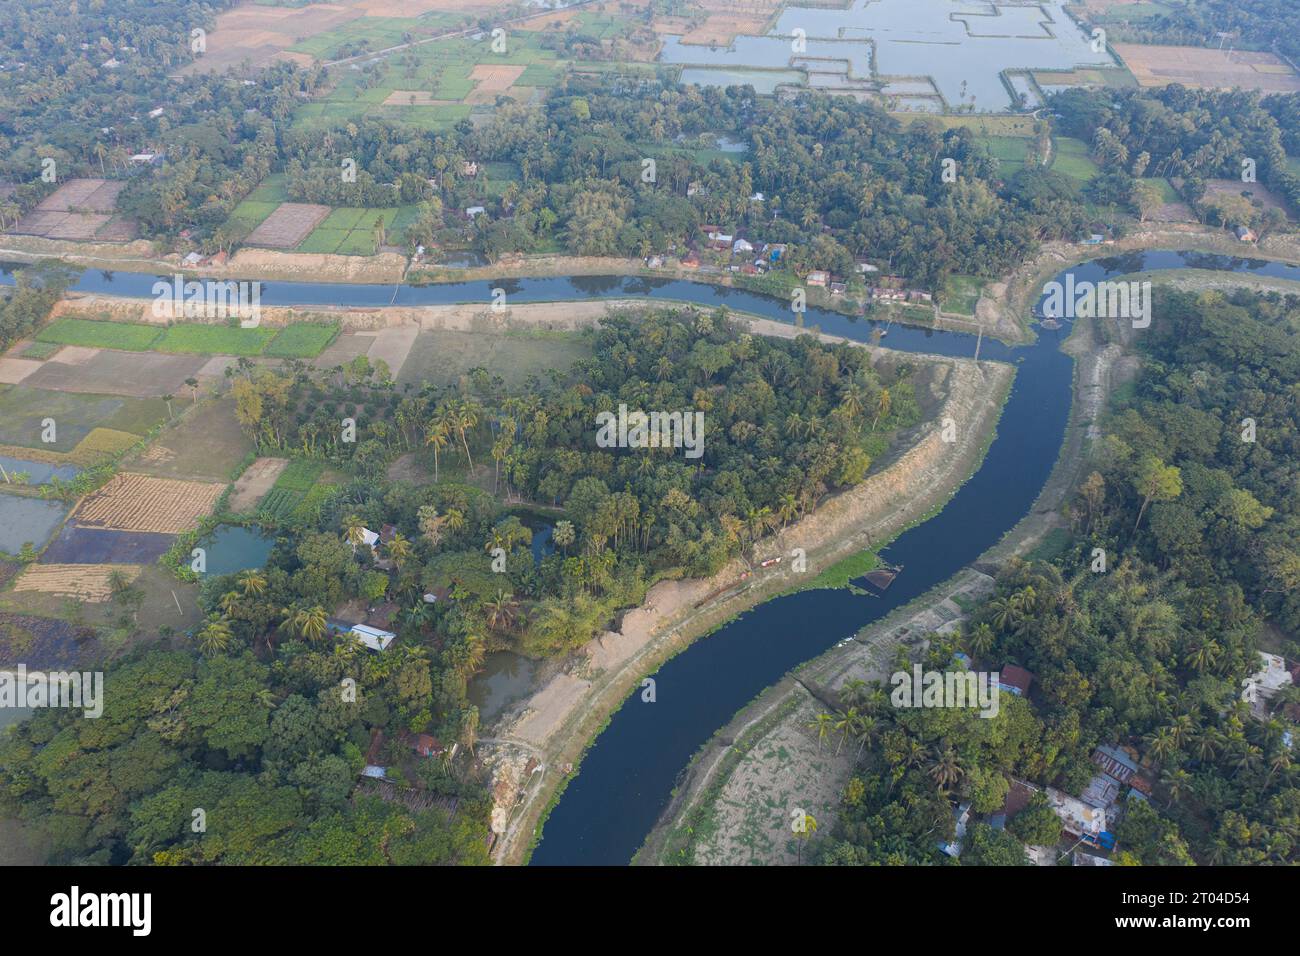 A dried-up canal at Keshabpur in Jashore returns to life after re-excavation works, aerial view of rural Bangladesh. Stock Photo